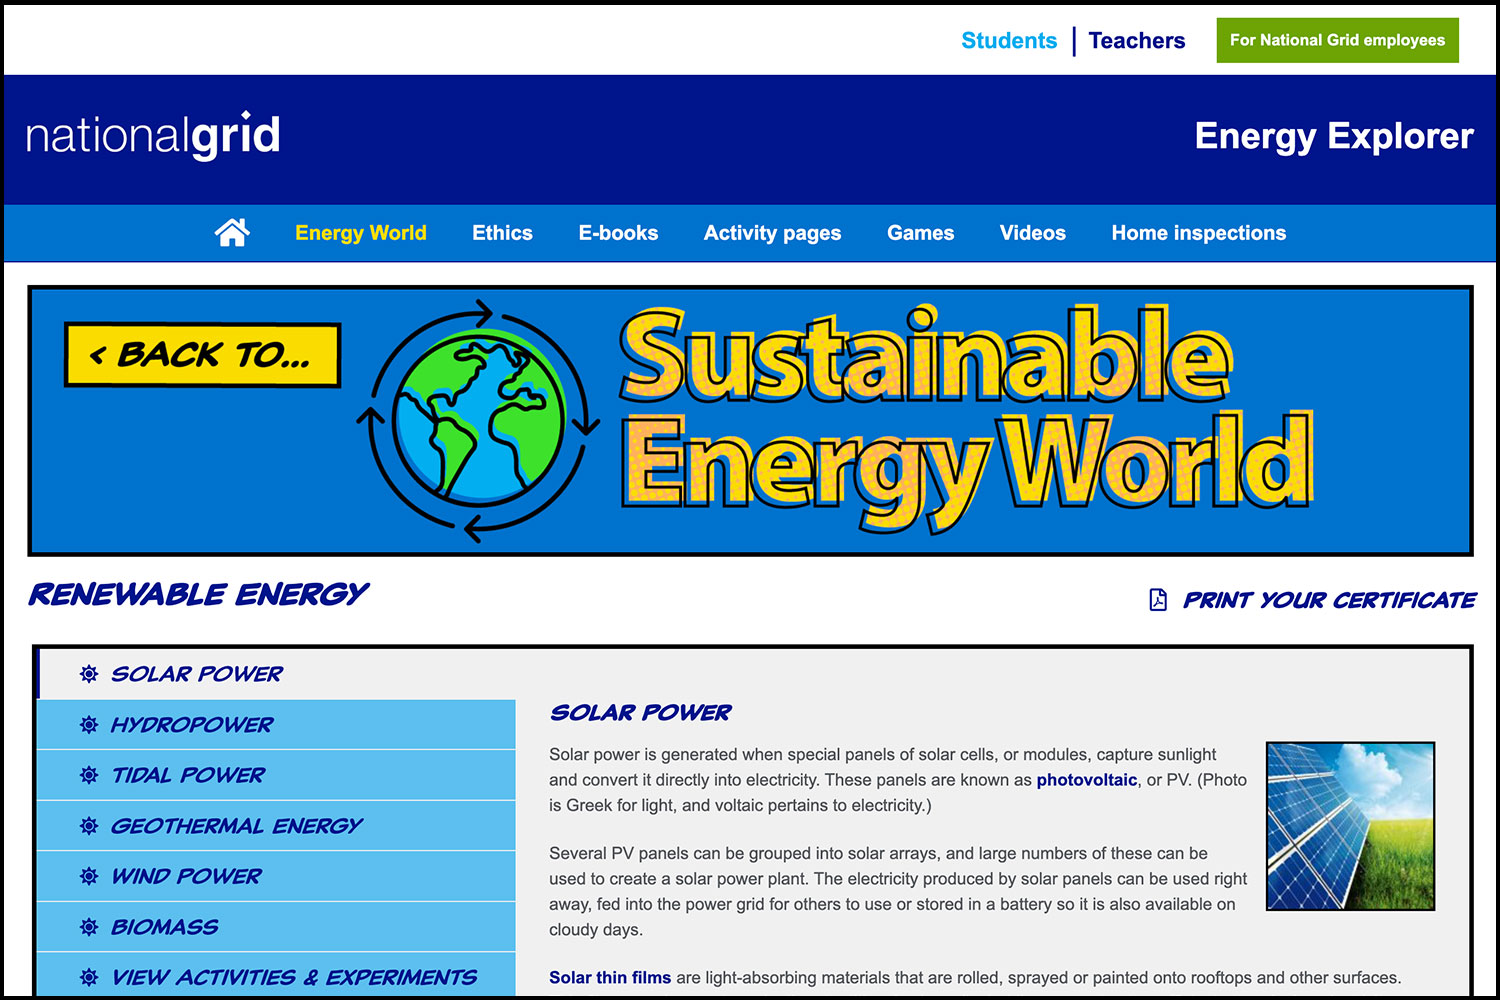 National Grid Energy Explorer website landing page for Sustainable Energy World